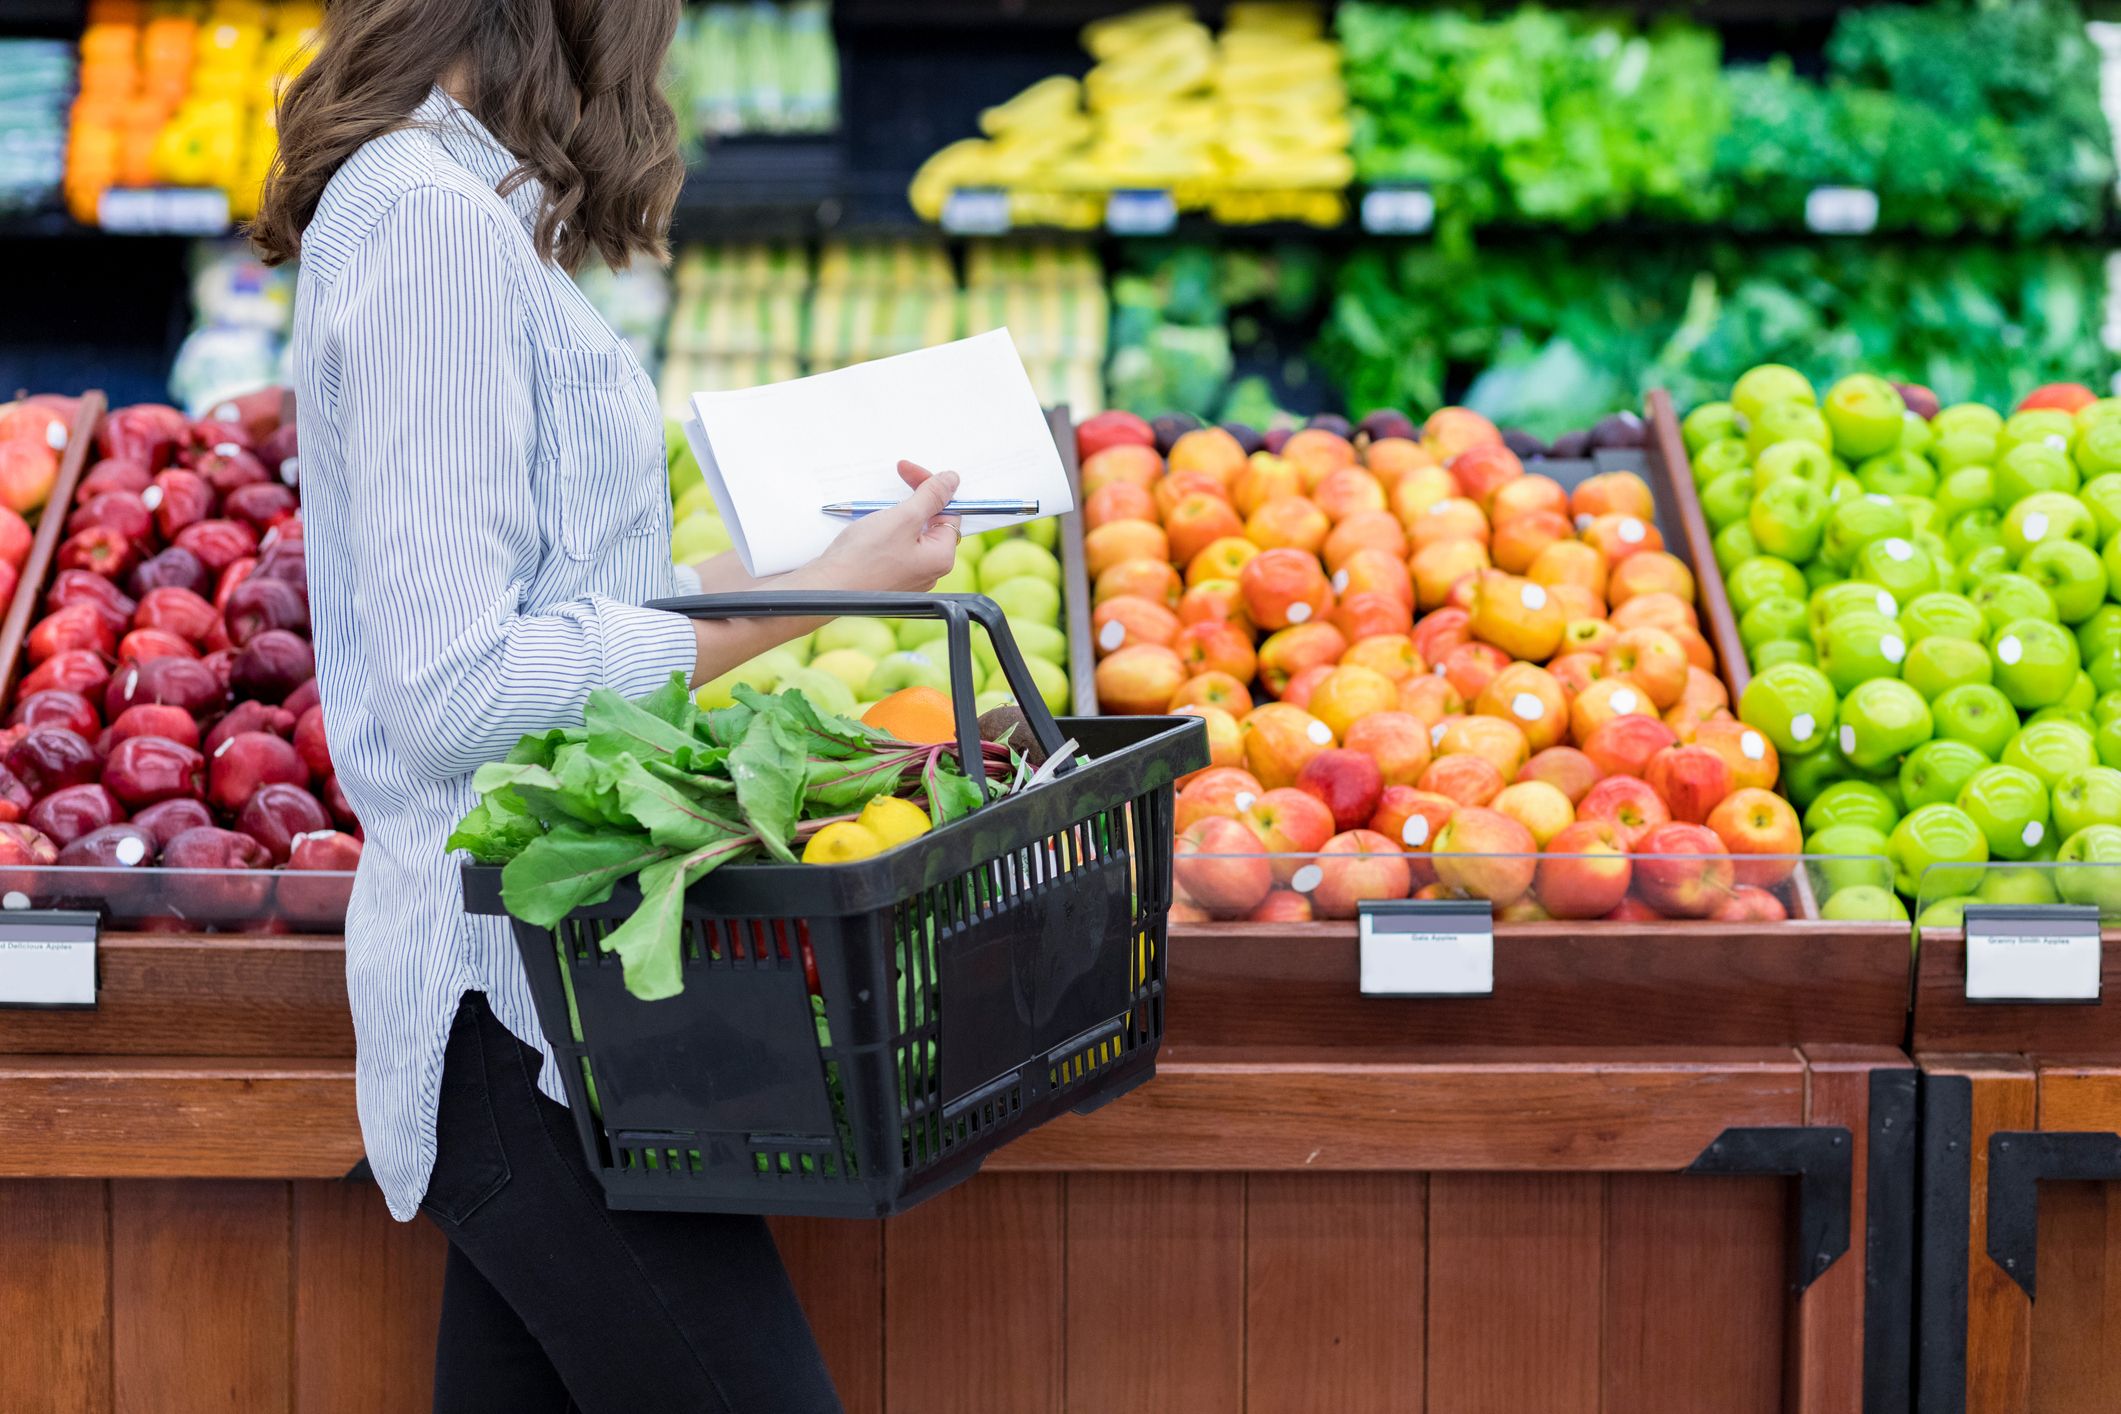 11 Grocery Store Mistakes You're Probably Making - Diet Advice